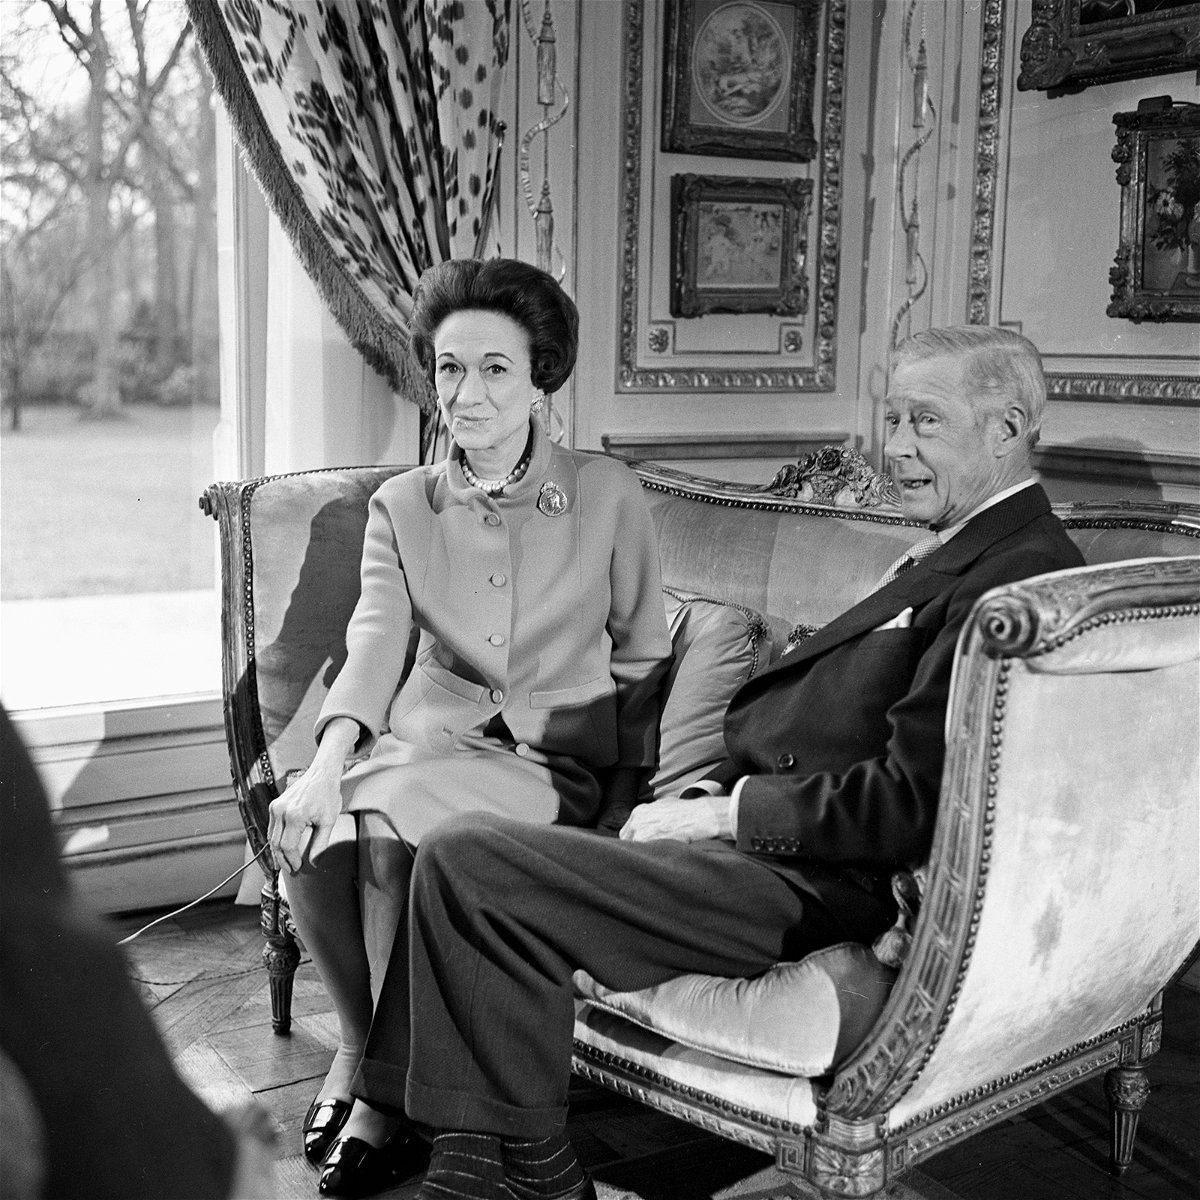 <i>Robert Siegler/INA/Getty Images</i><br/>The Duke and Duchess of Windsor in the lounge of the Paris mansion.